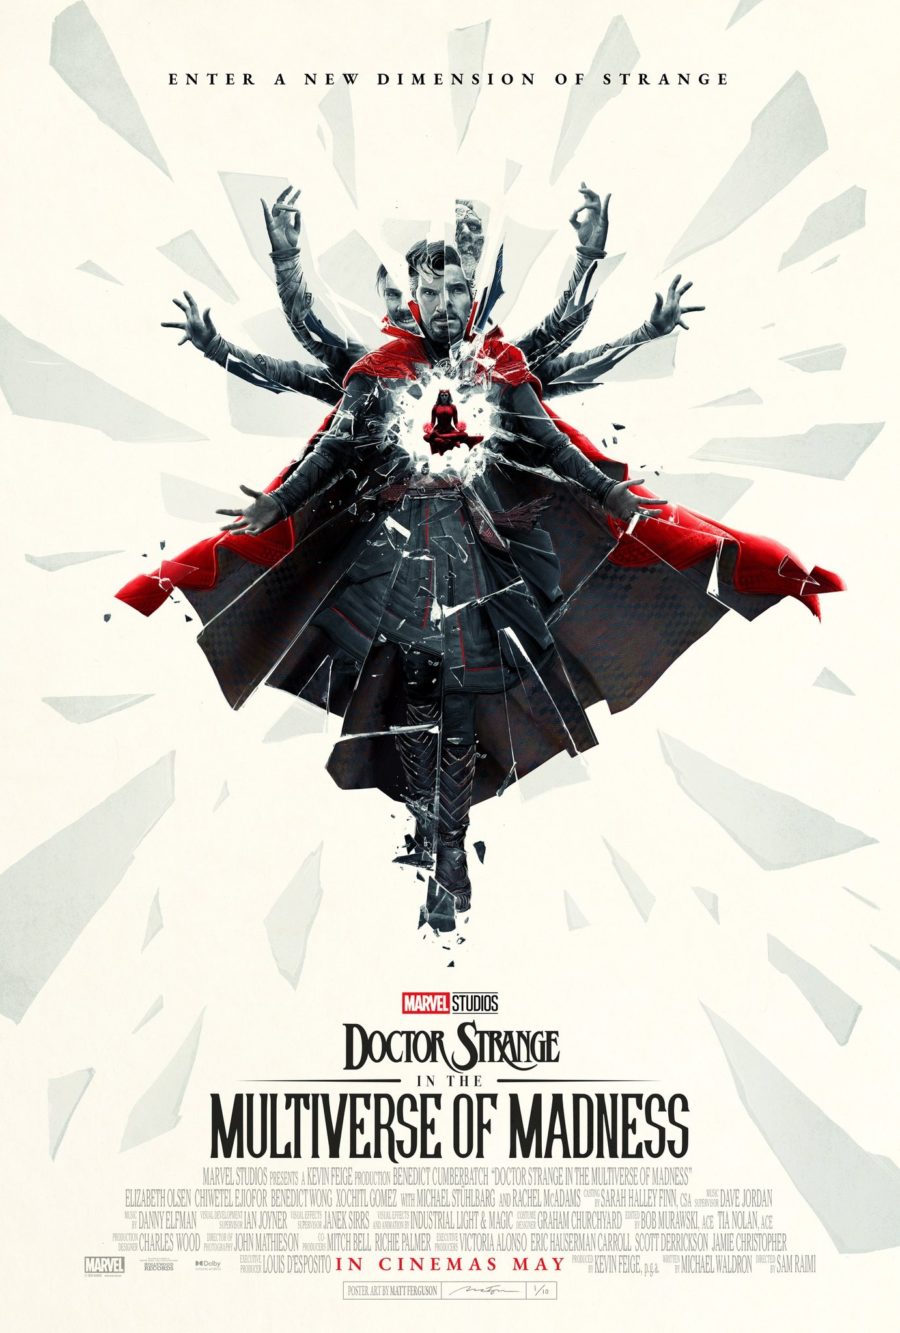 Filmkritik: »Doctor Strange in the Multiverse of Madness«